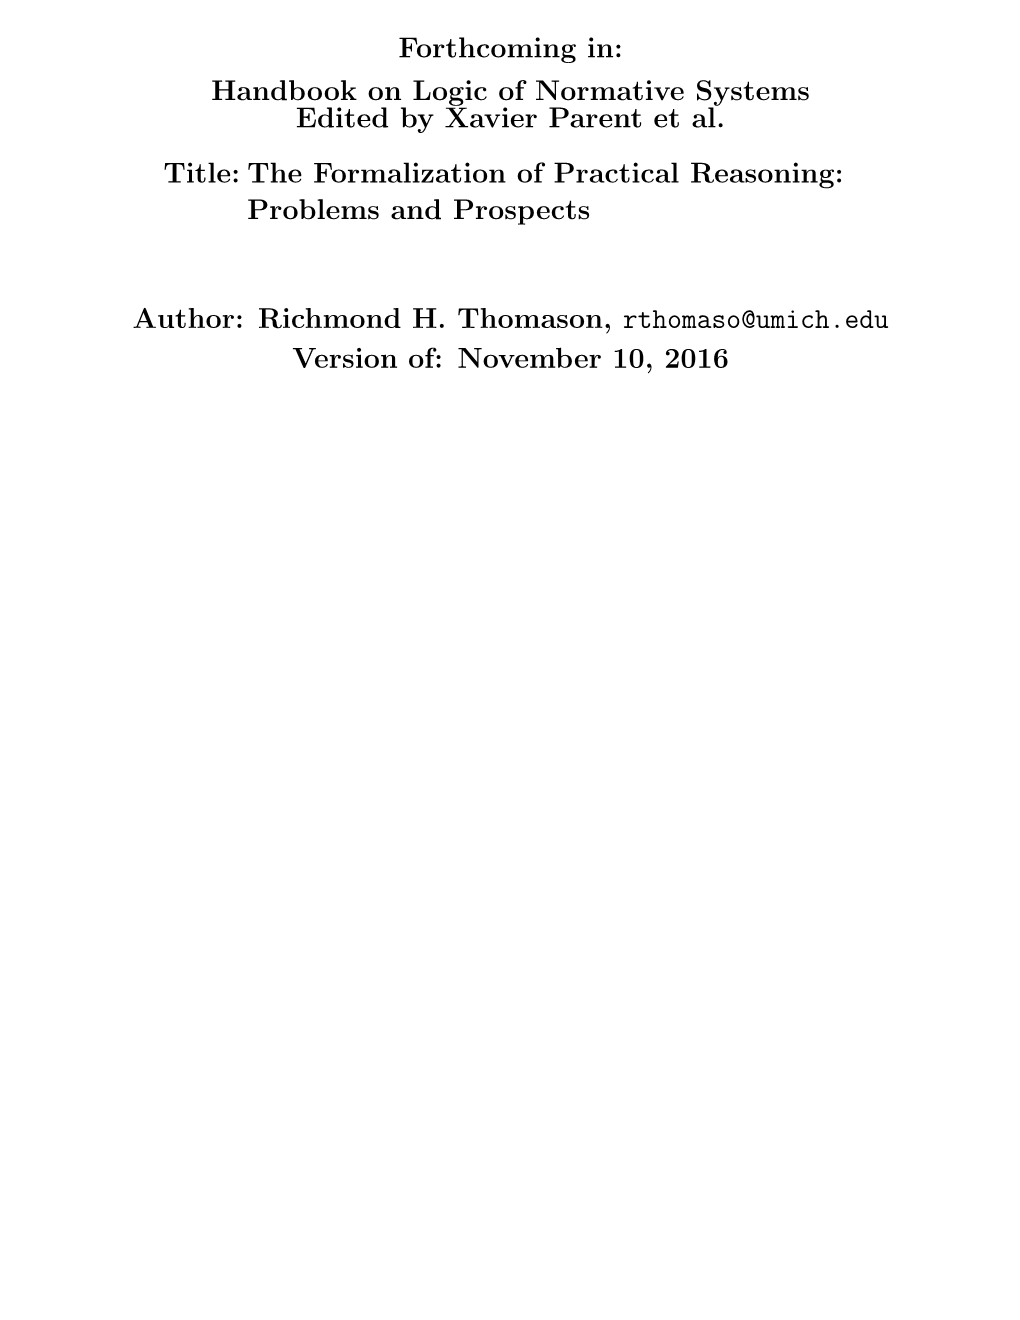 The Formalization of Practical Reasoning: Problems and Prospects